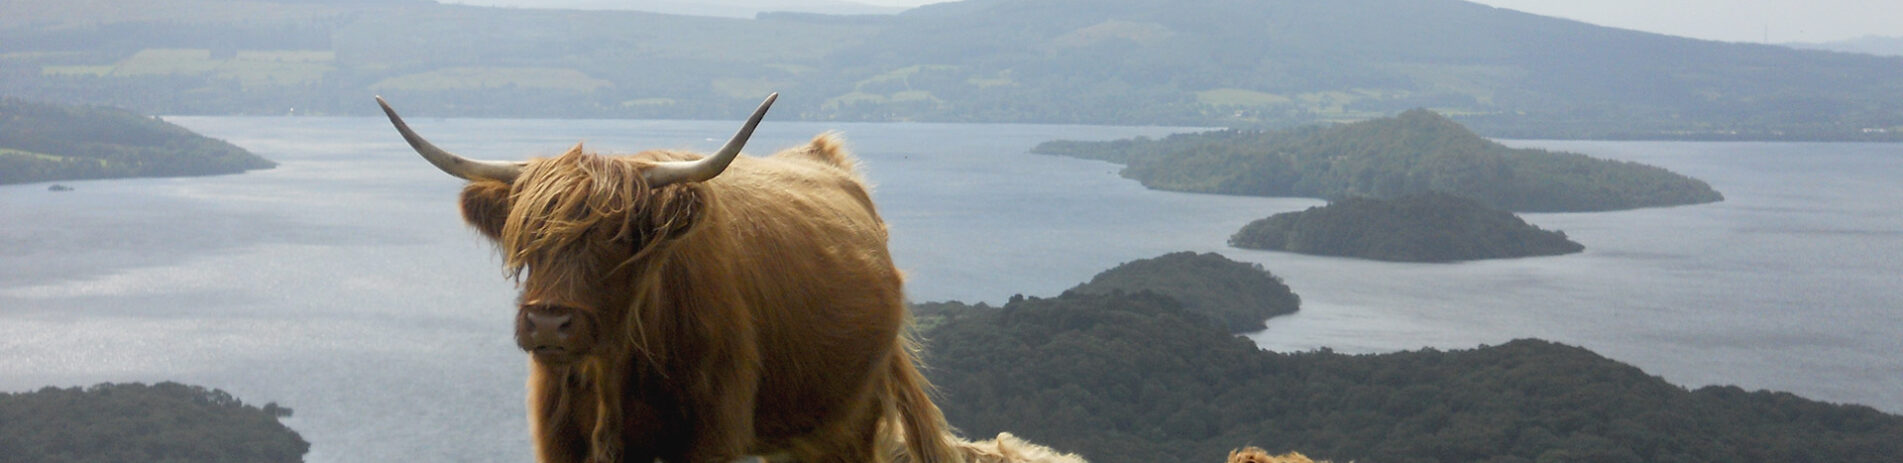 highland-cows-on-conic-hill-with-loch-lomond-and-wooded-islands-in-the-distance